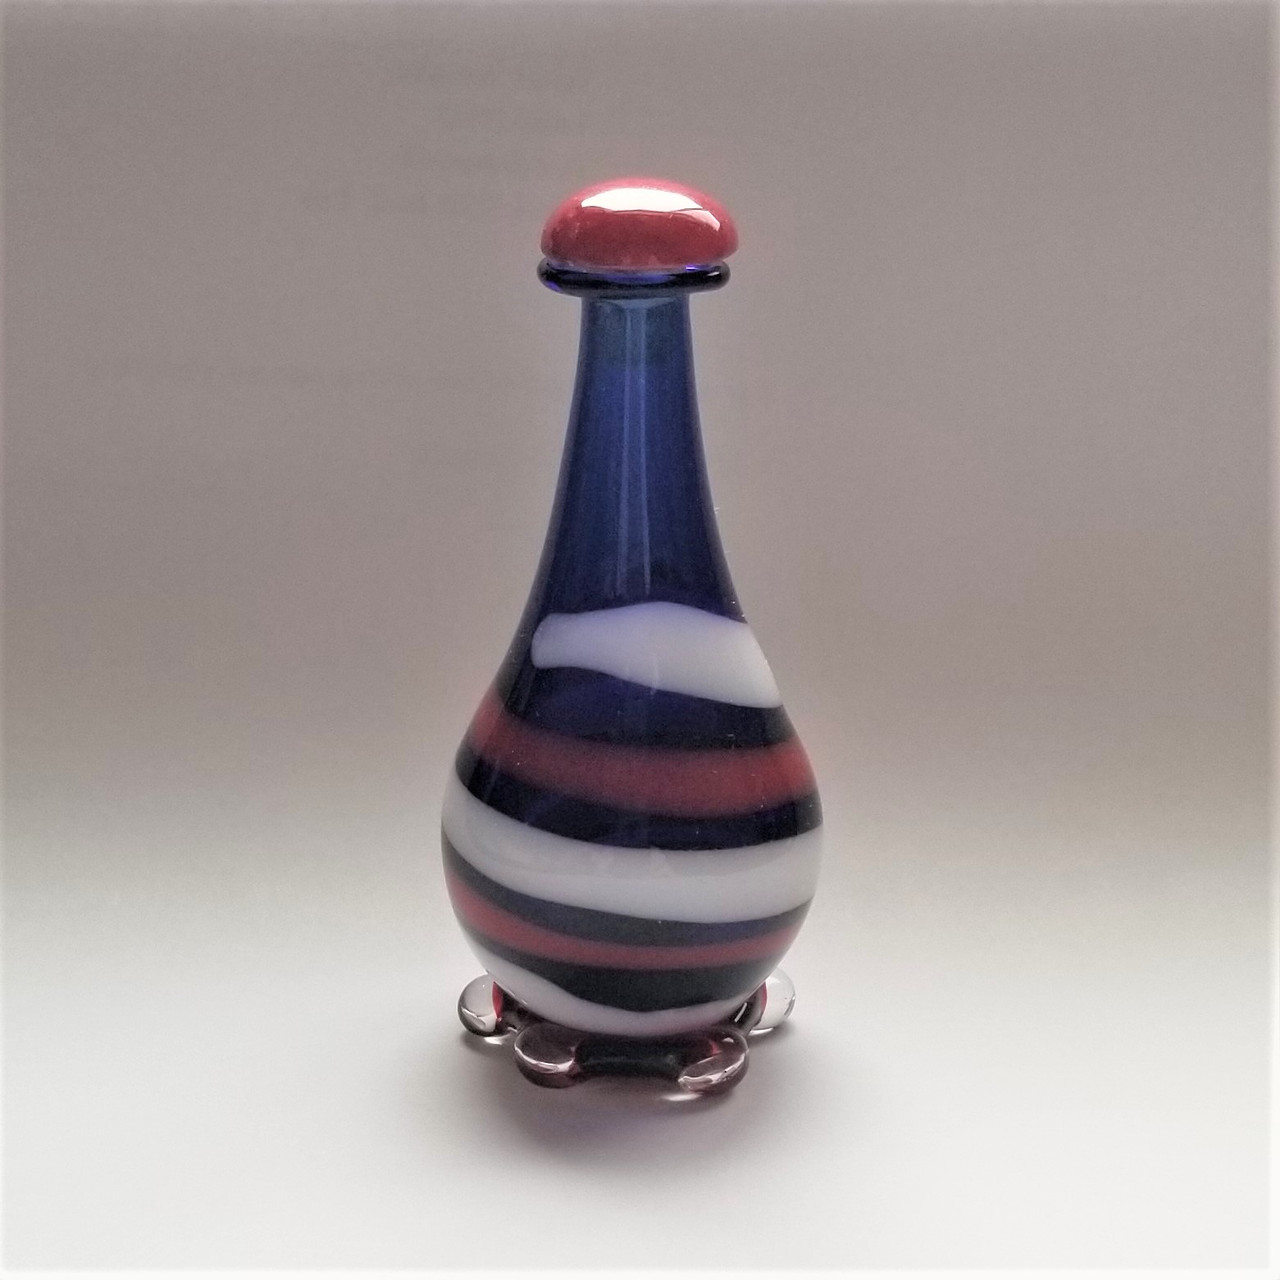 The American (Red, White & Blue) Contemporary Tear Bottle